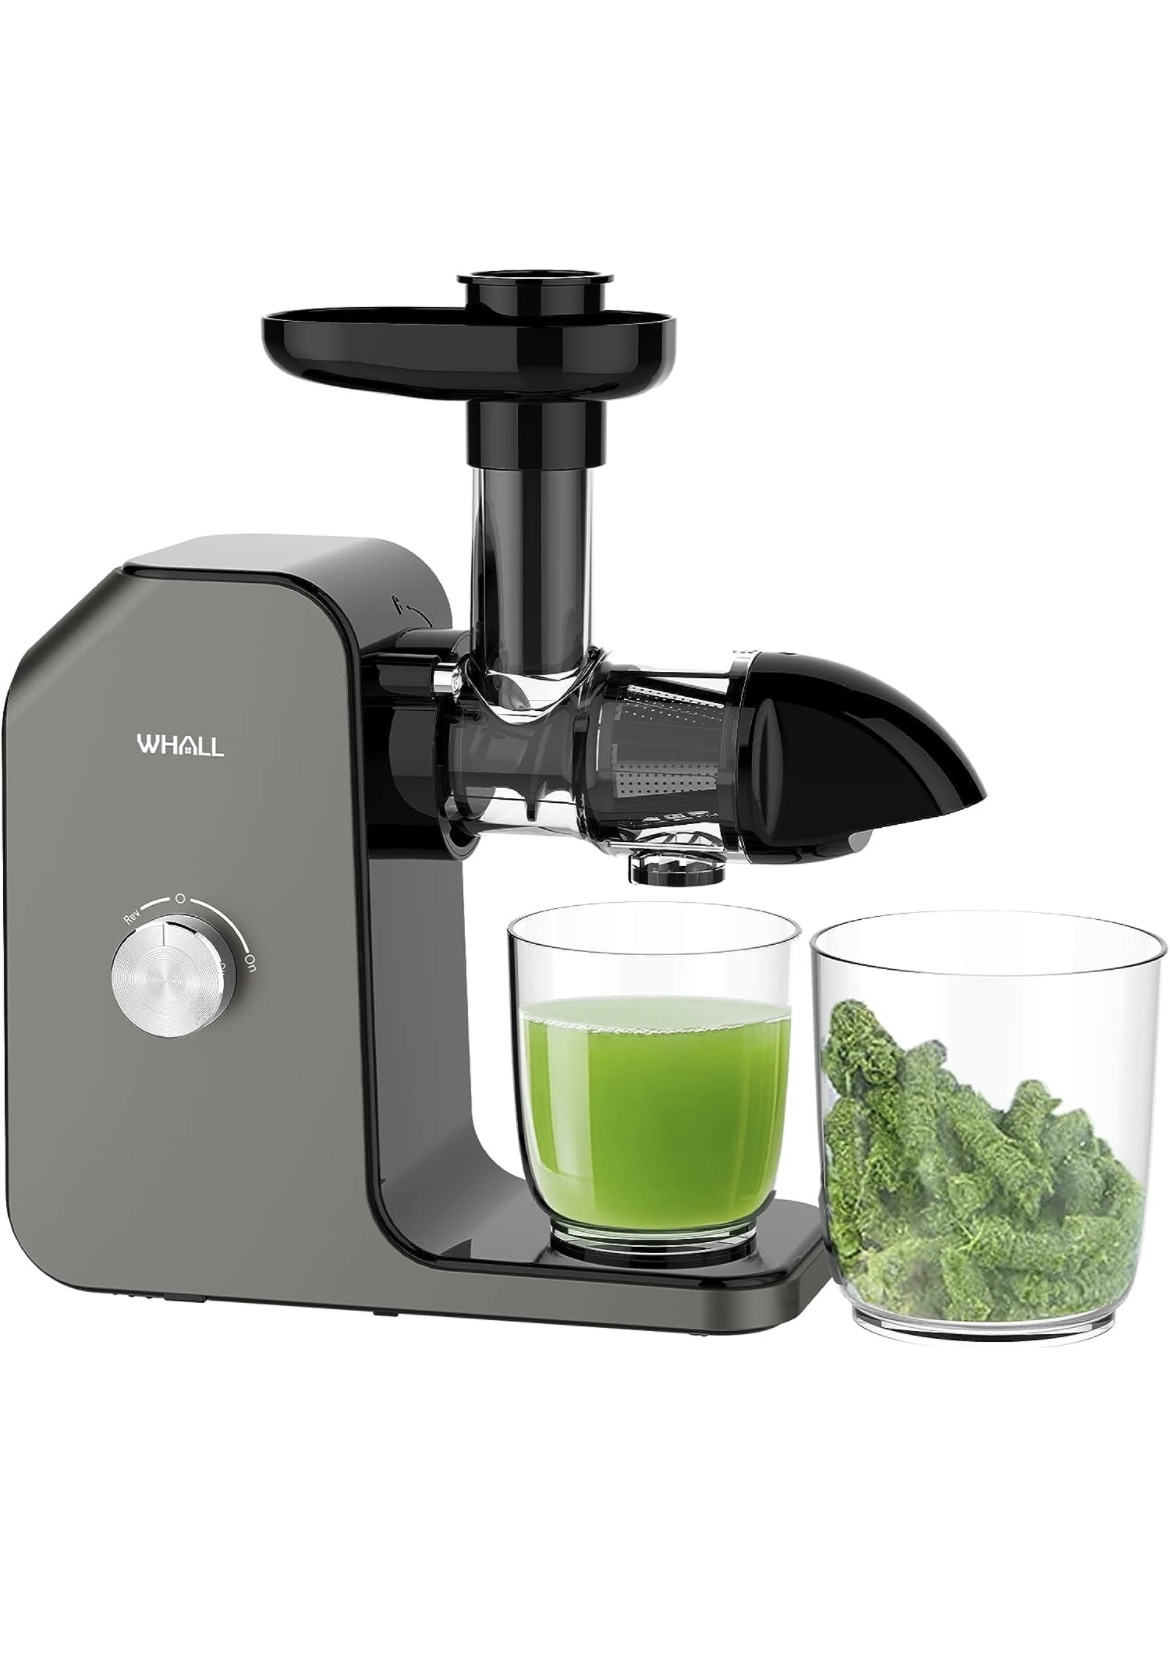 Amazon.com: whall Slow Juicer, Masticating Juicer, Celery Juicer Machines, Cold Press Juicer Machines Vegetable and Fruit, Juicers with Quiet Motor & Reverse Function, Easy to Clean with Brush,Grey: H